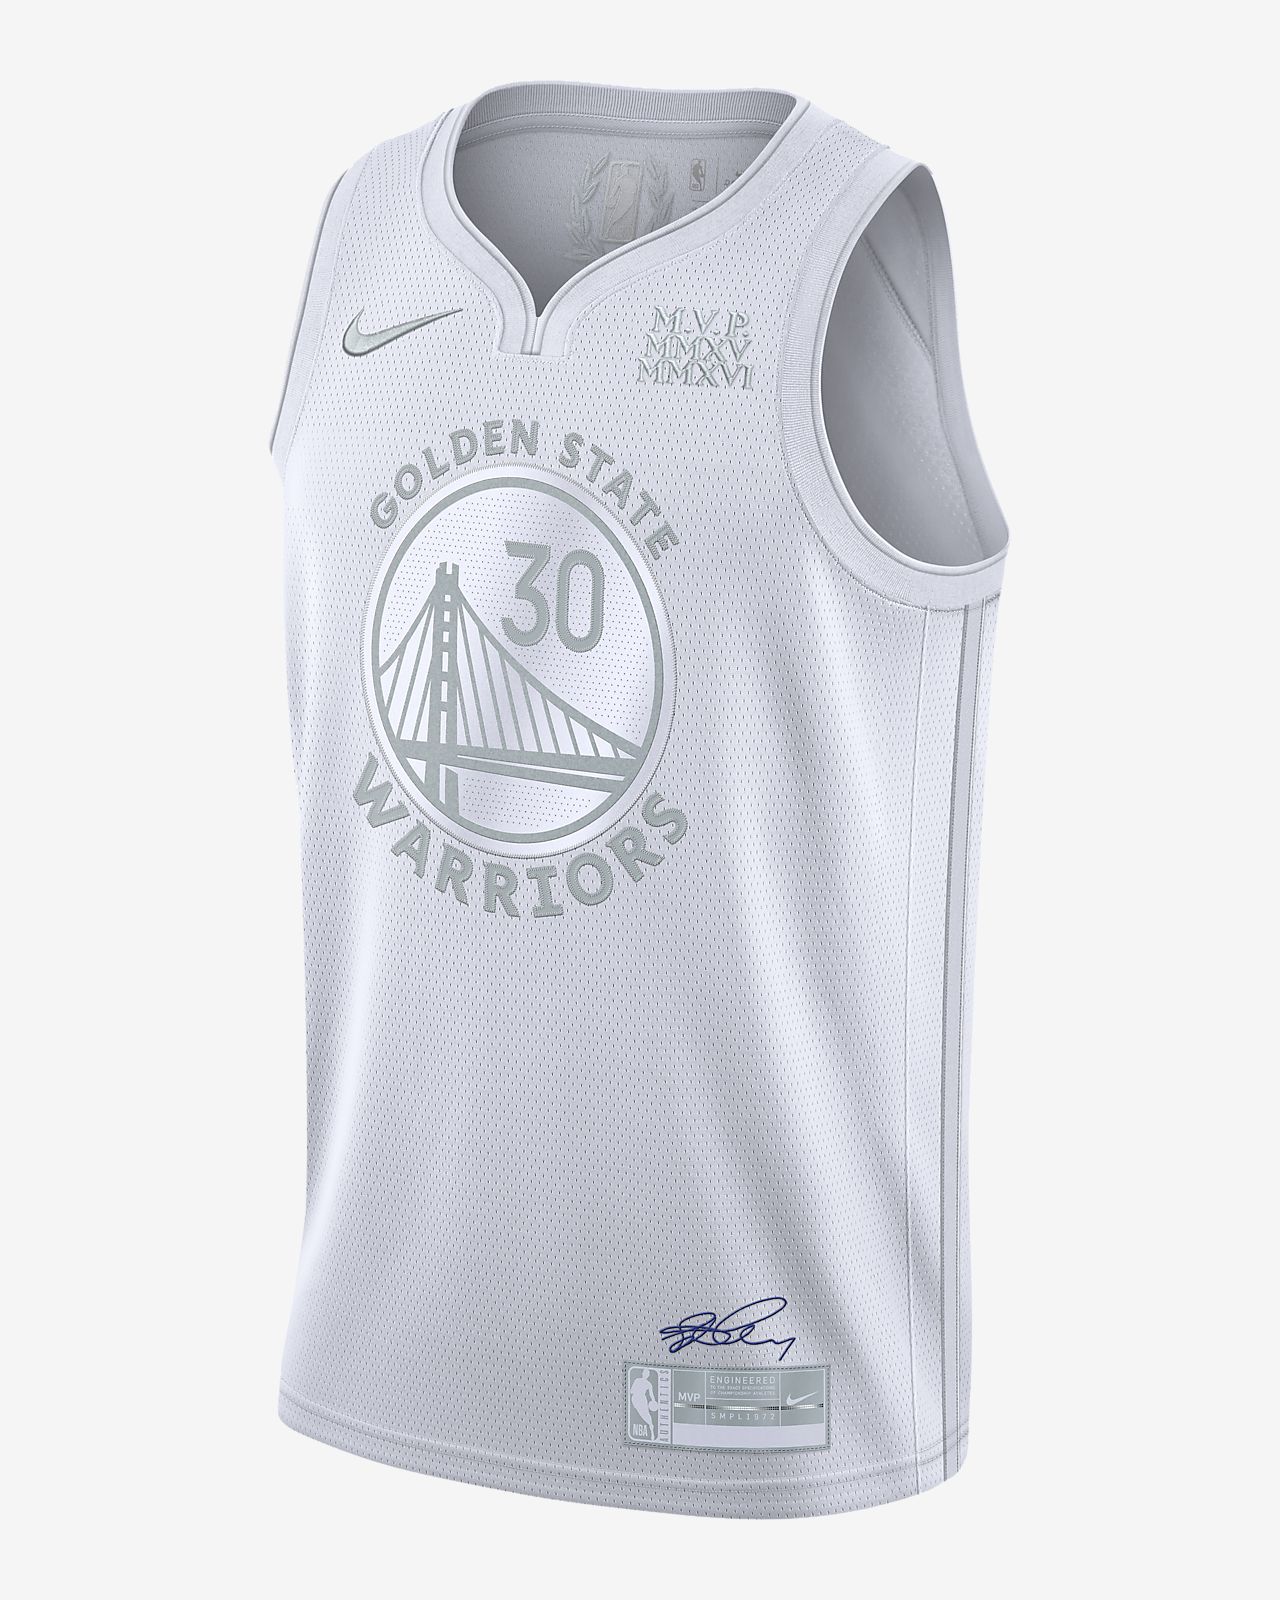 kevin durant rookie jersey